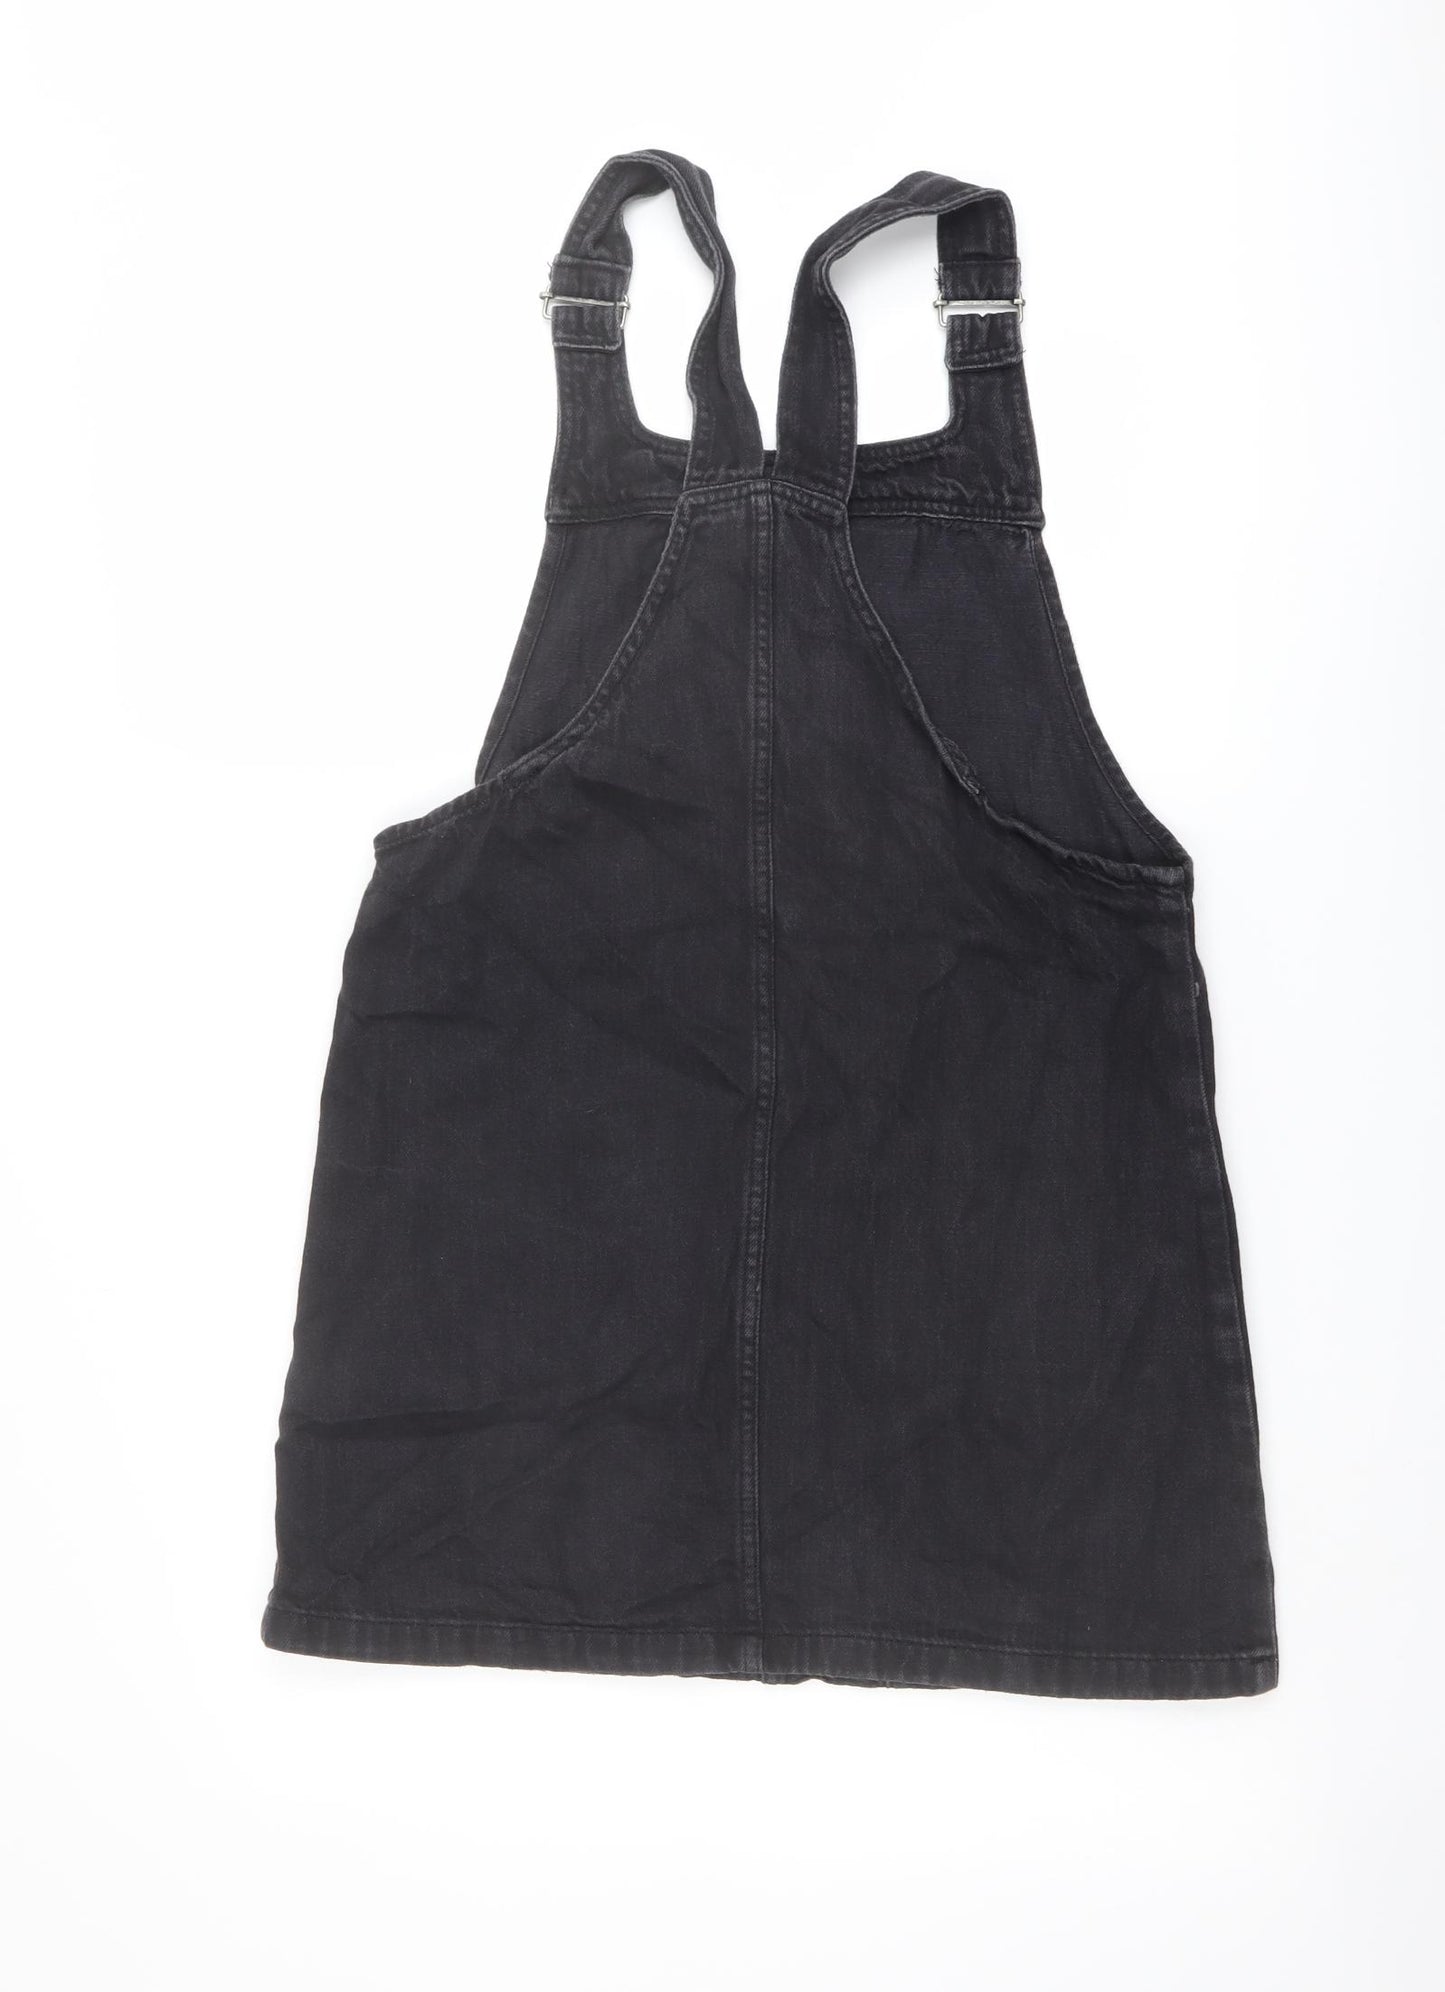 Topshop Womens Grey Cotton Pinafore/Dungaree Dress Size 12 Square Neck Pullover